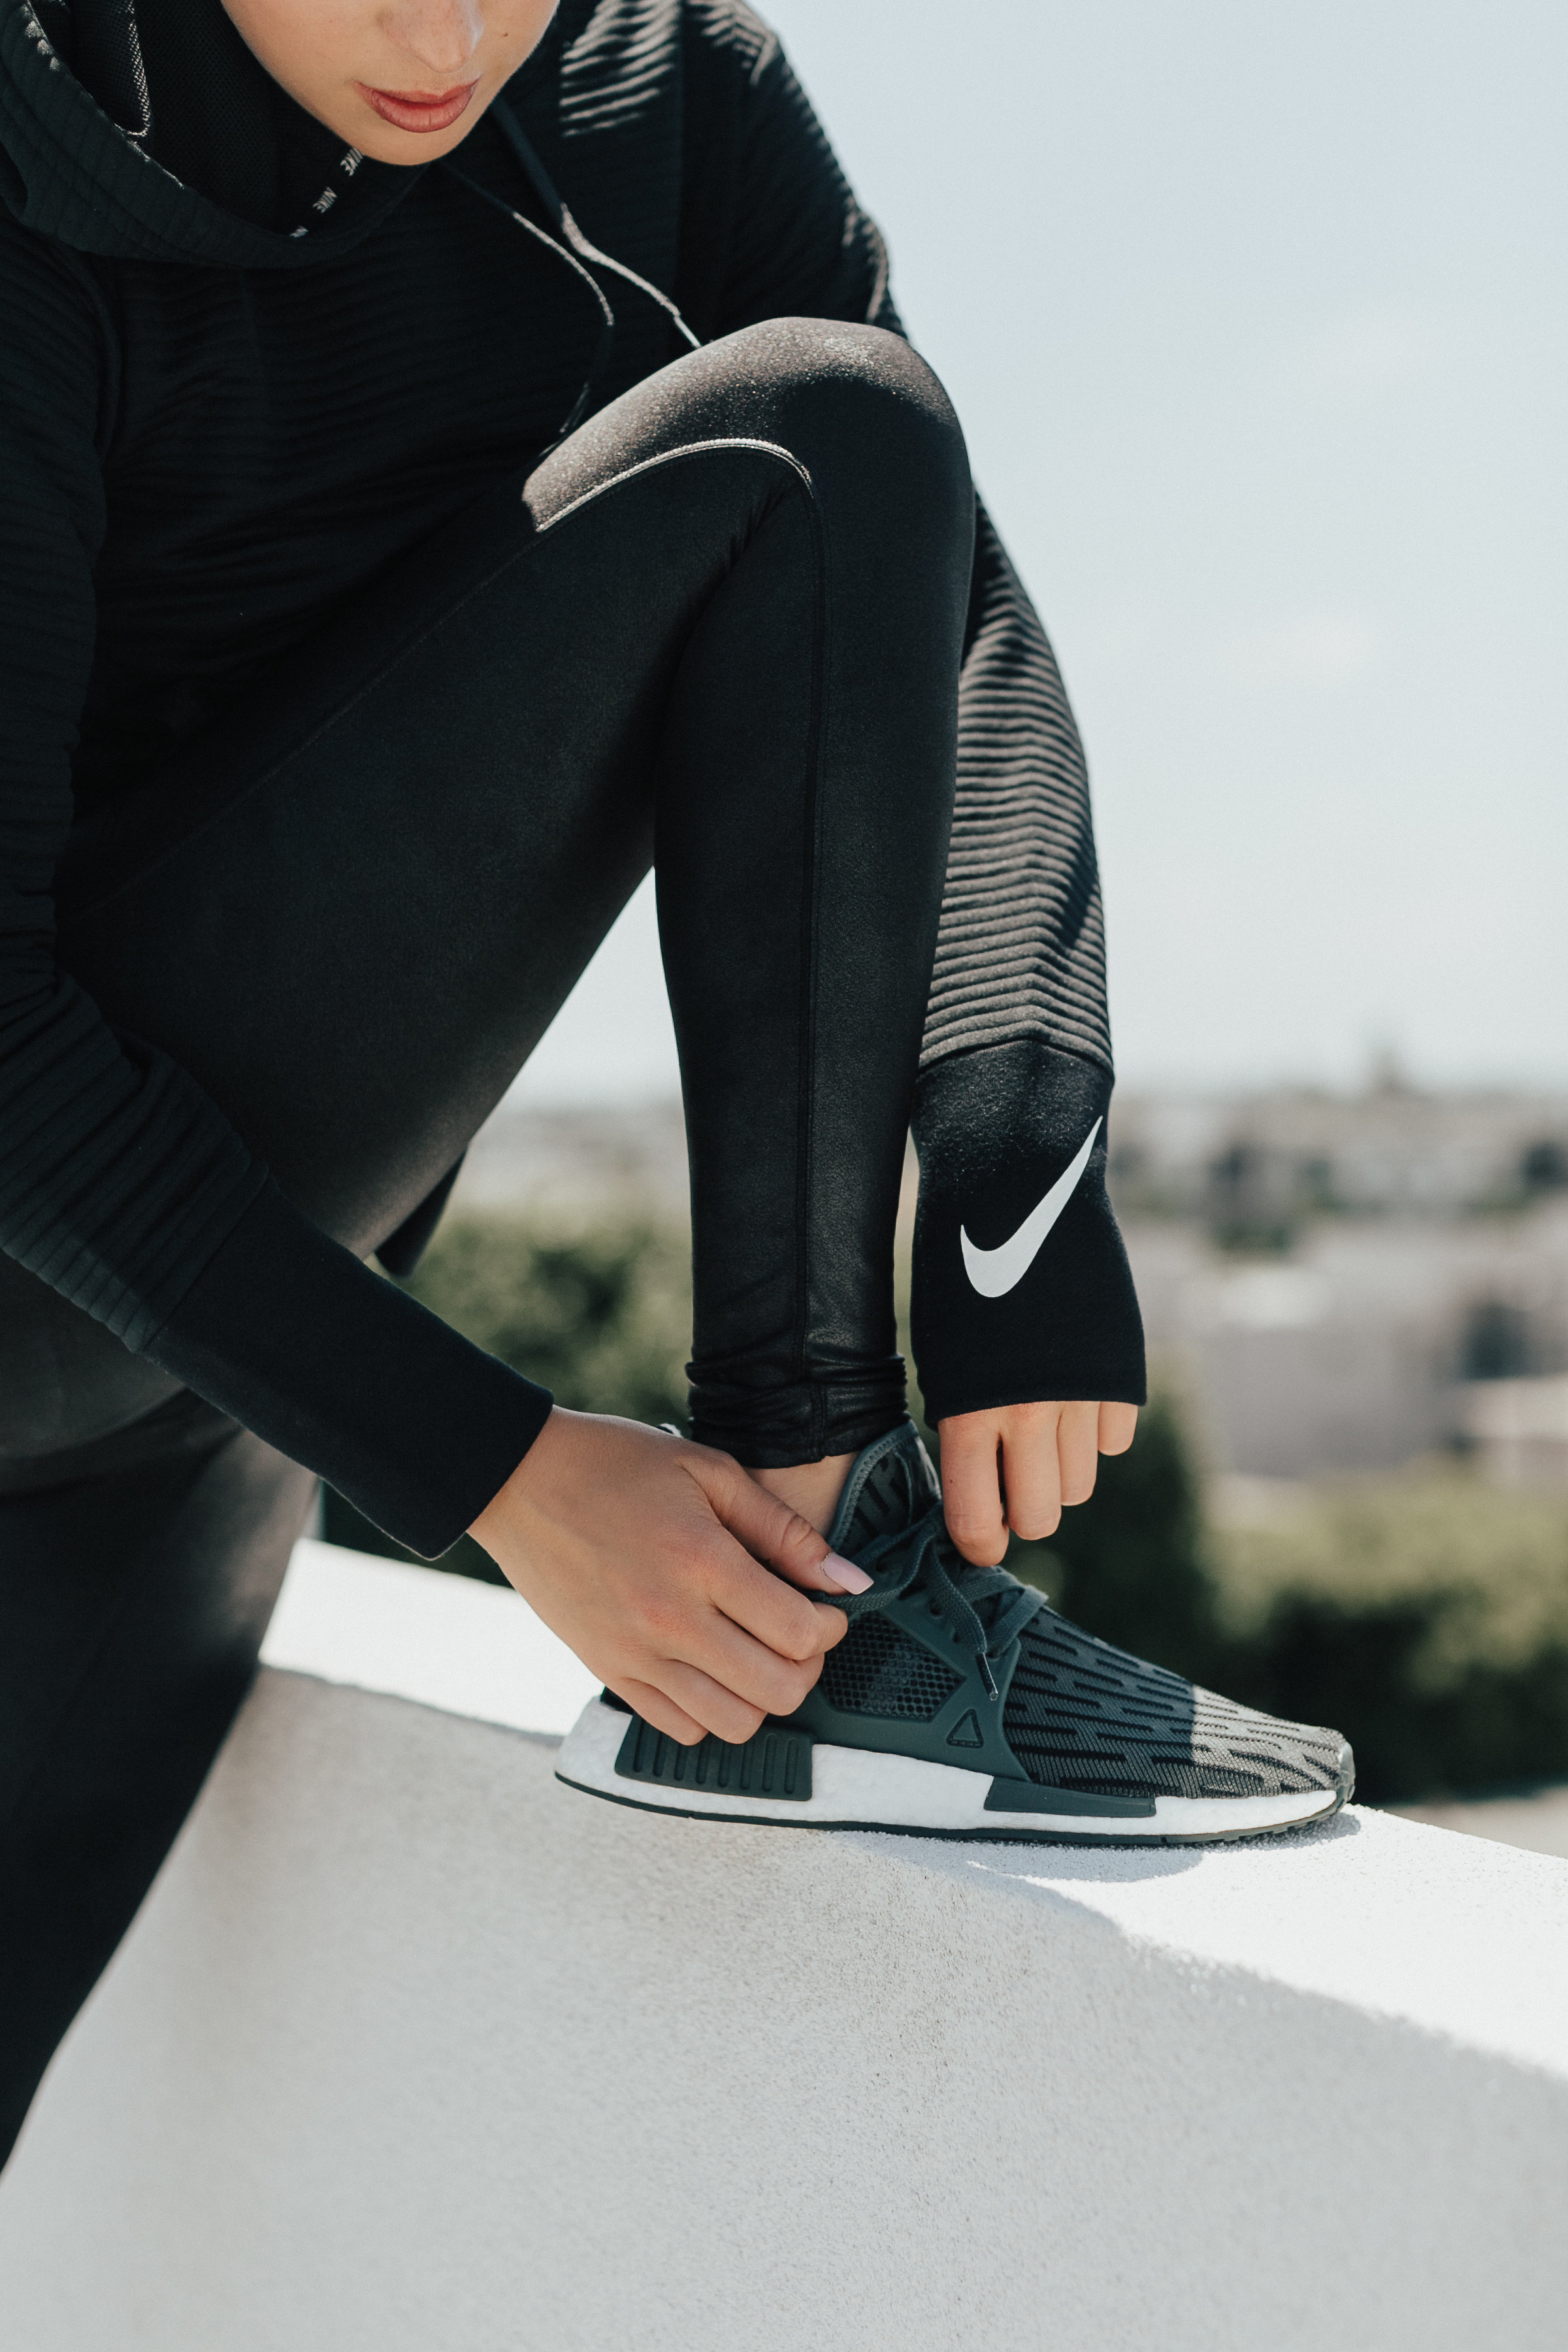 Blogger Payton Sartain of Hustle + Halcyon Shares her Fitness Regime with FinishLine, Wearing Nike and Adidas